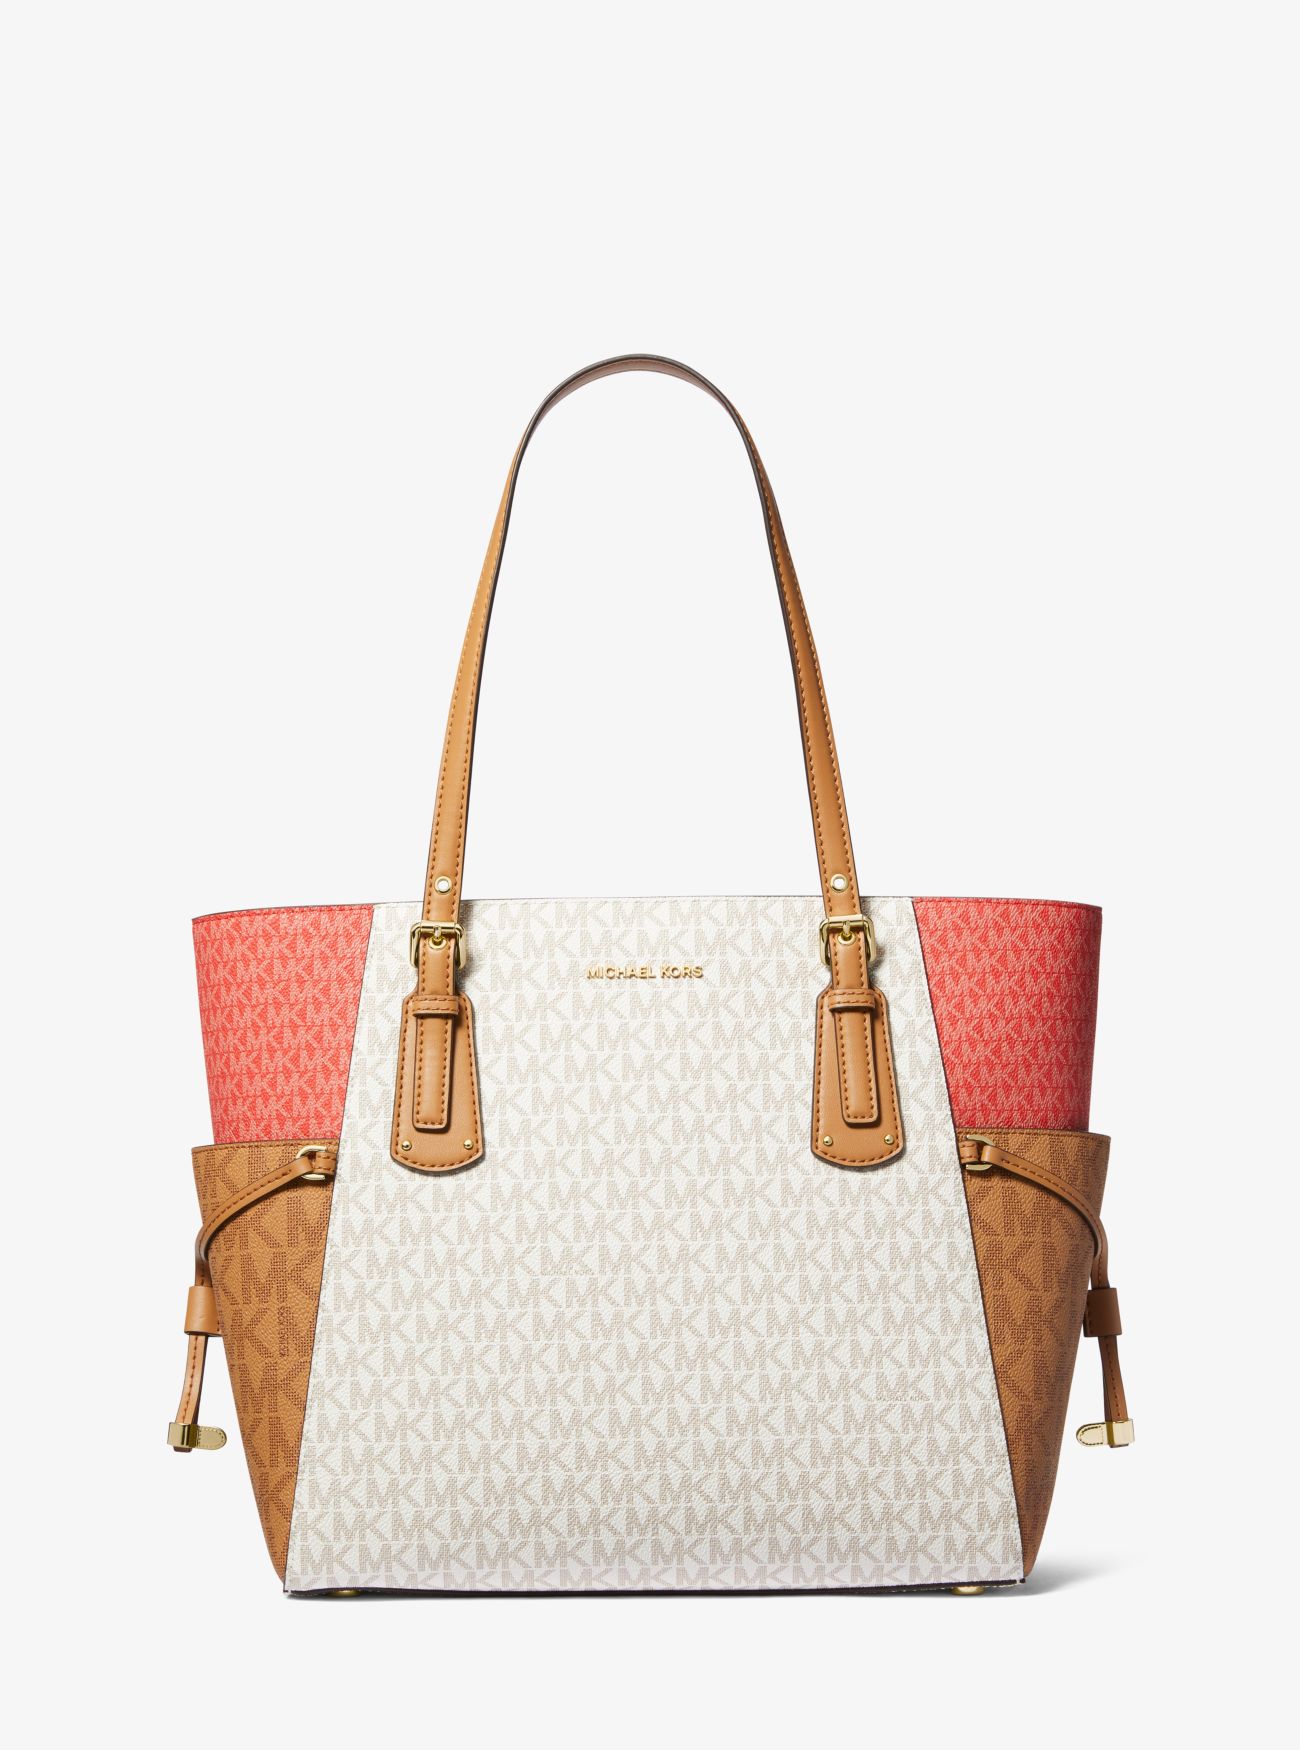 MK Voyager Small Color-Block Logo Tote Bag - Spiced Coral Multi - Michael Kors